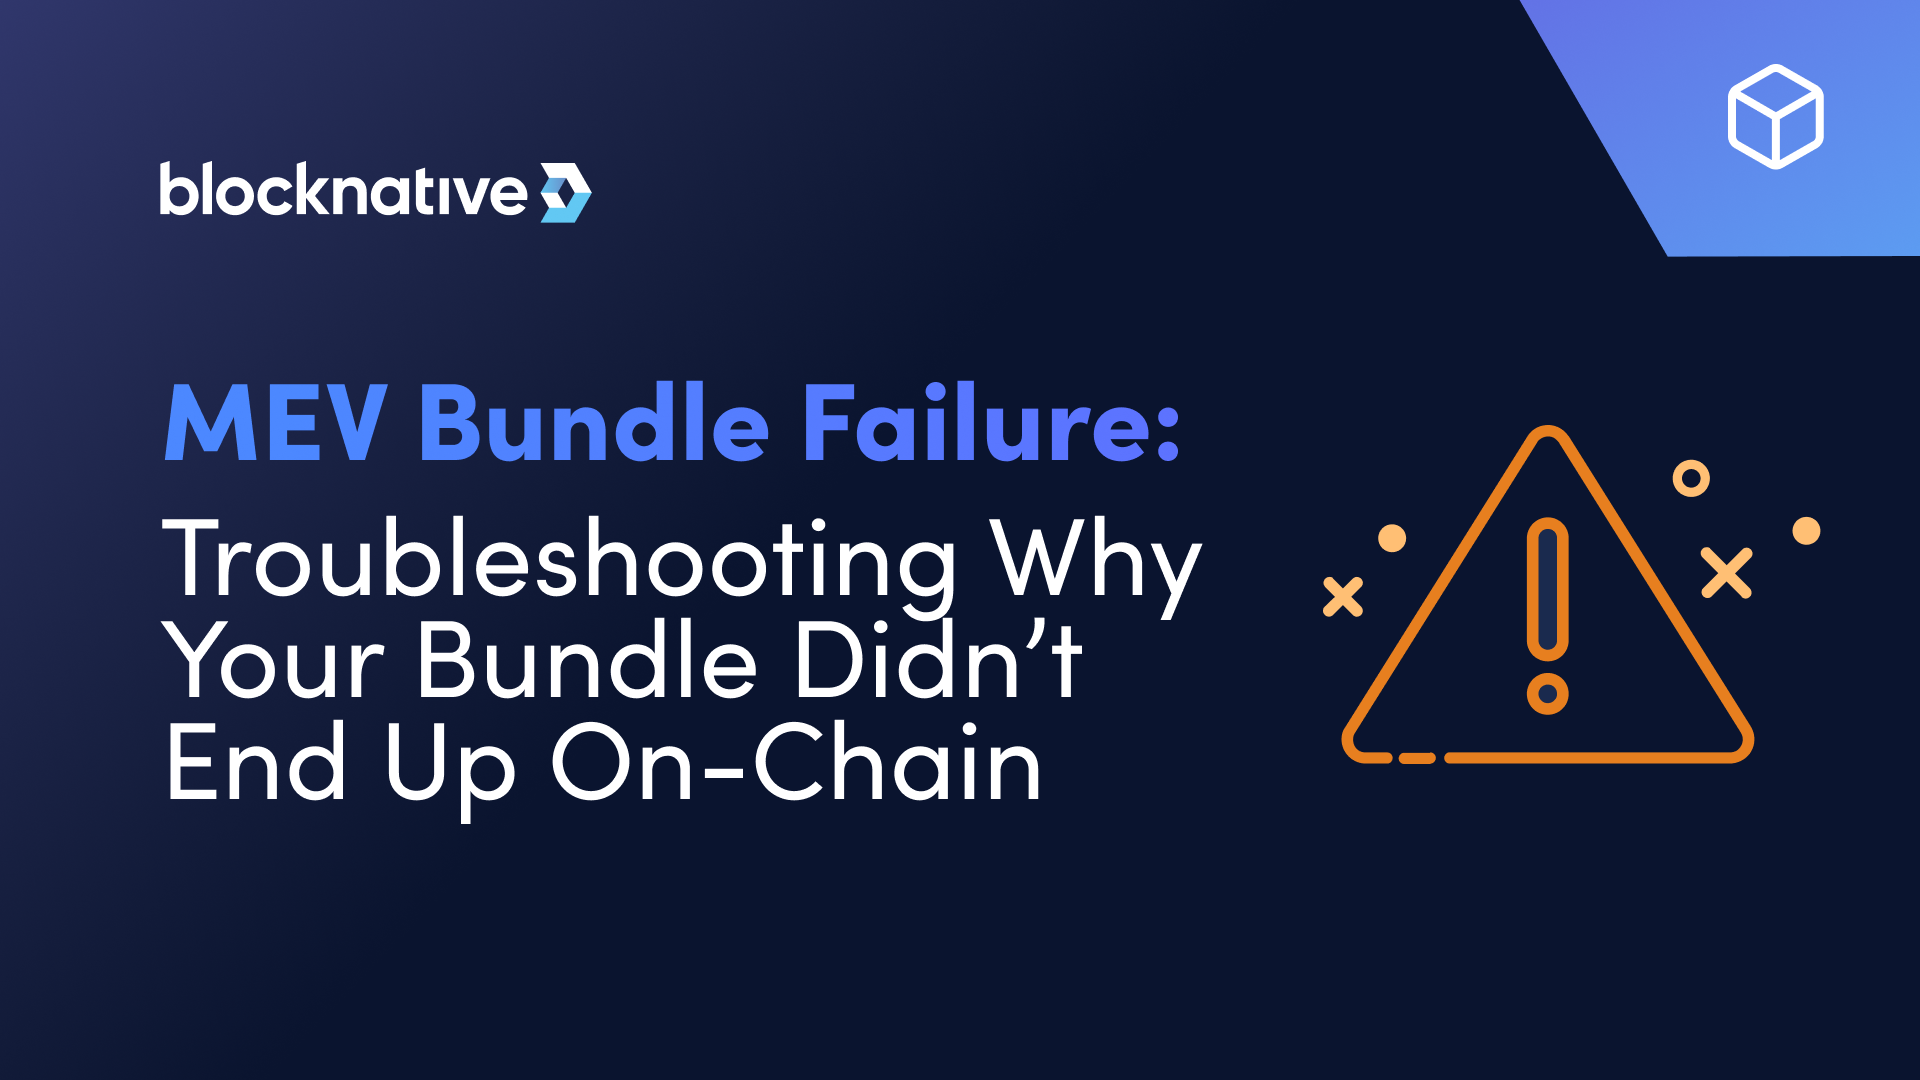 mev-bundle-failure:-troubleshooting-why-your-bundle-didn’t-end-up-on-chain